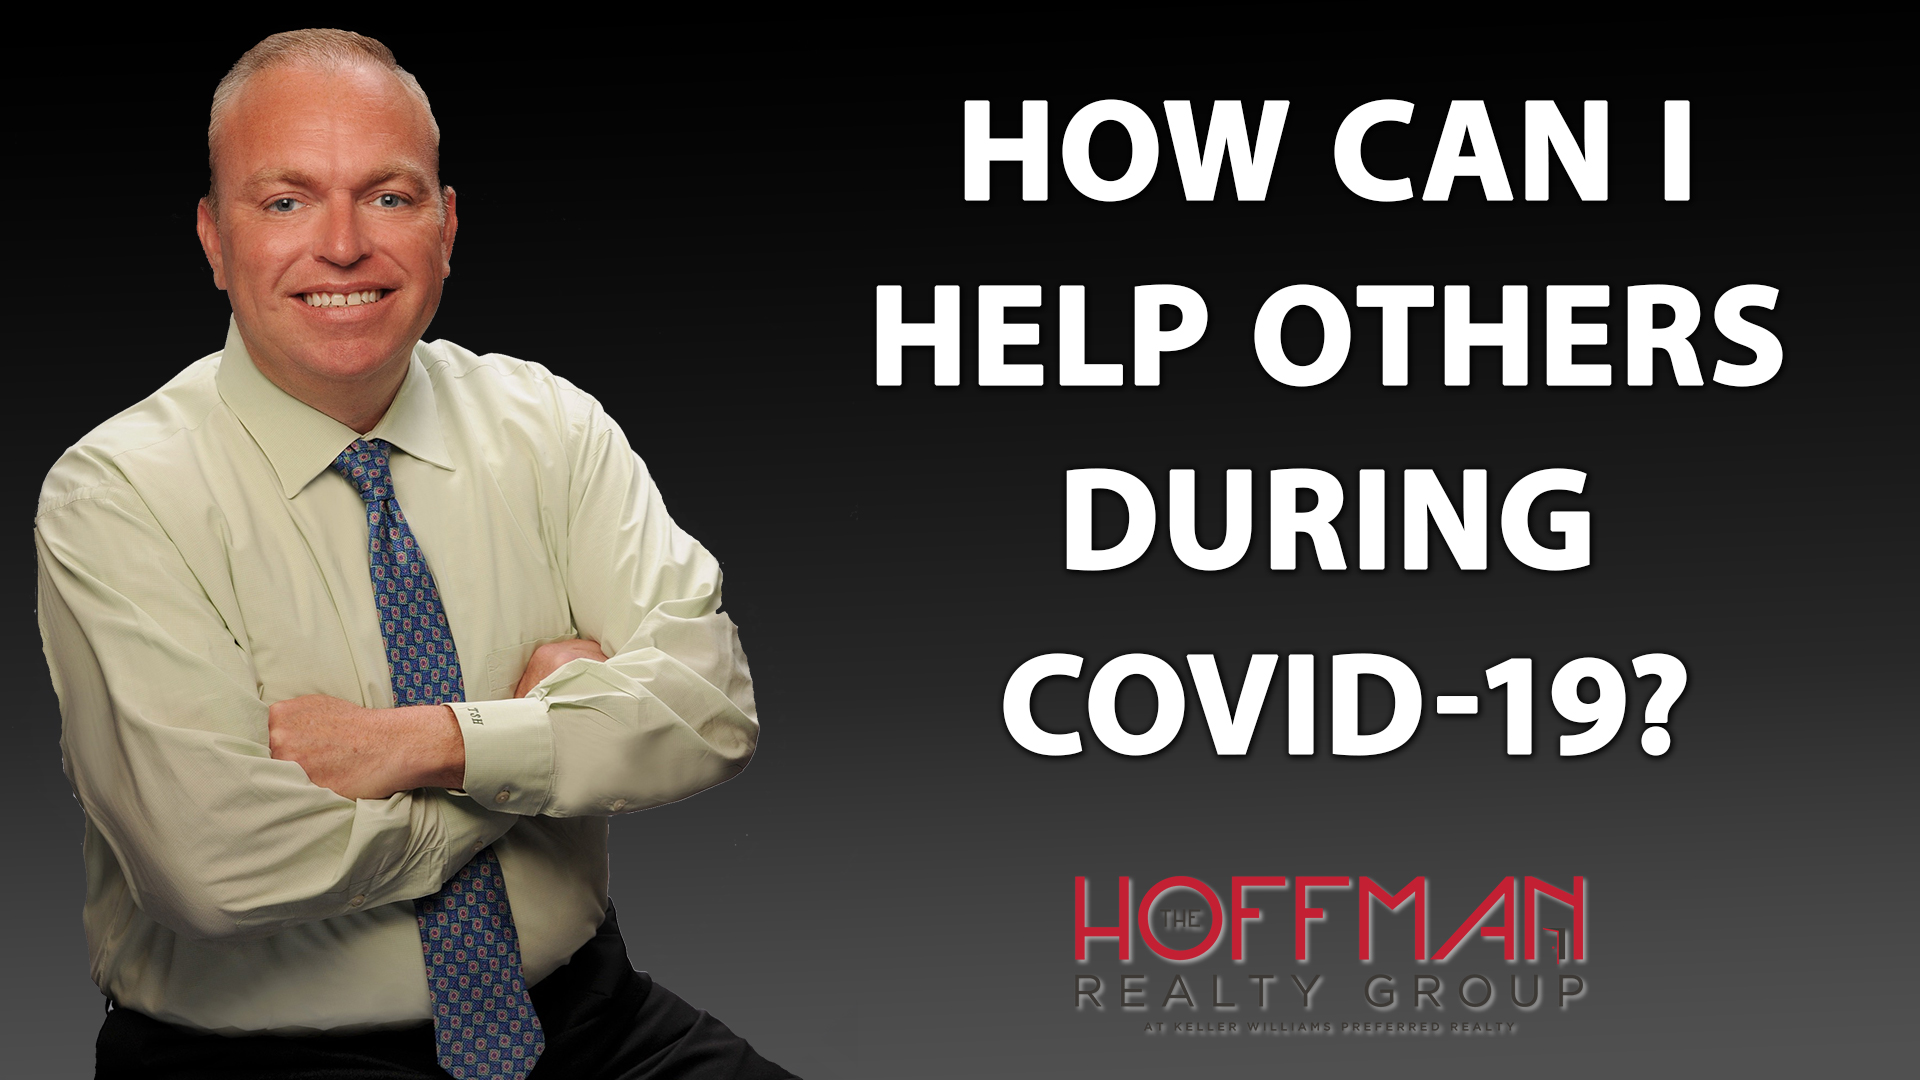 8 Ways to Help Others During COVID-19